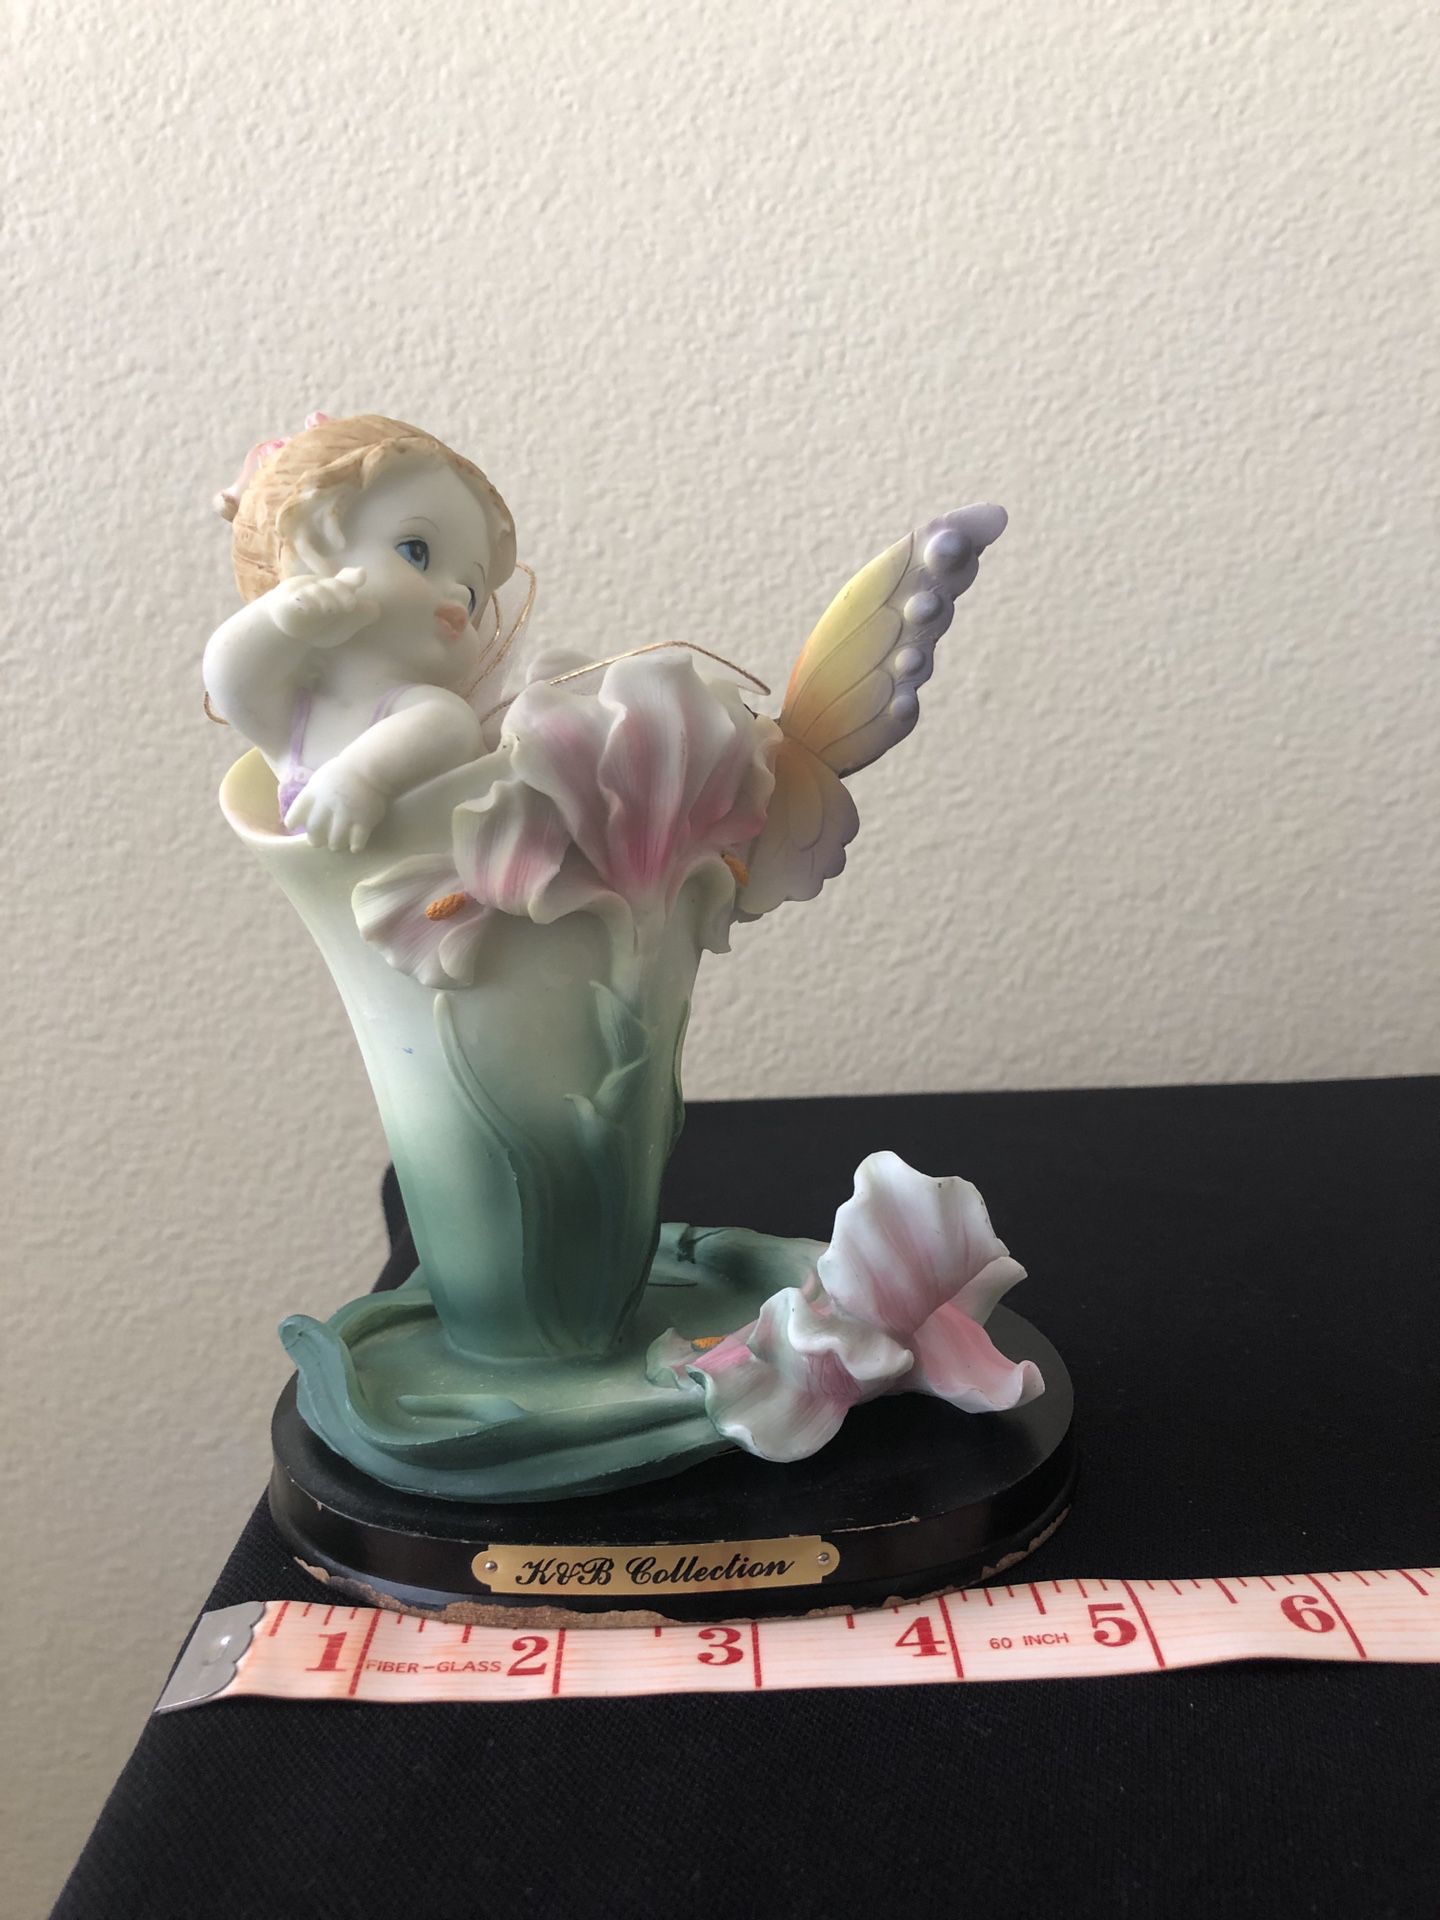 KvB Collection Statue - Angel and Butterfly - Good Condition